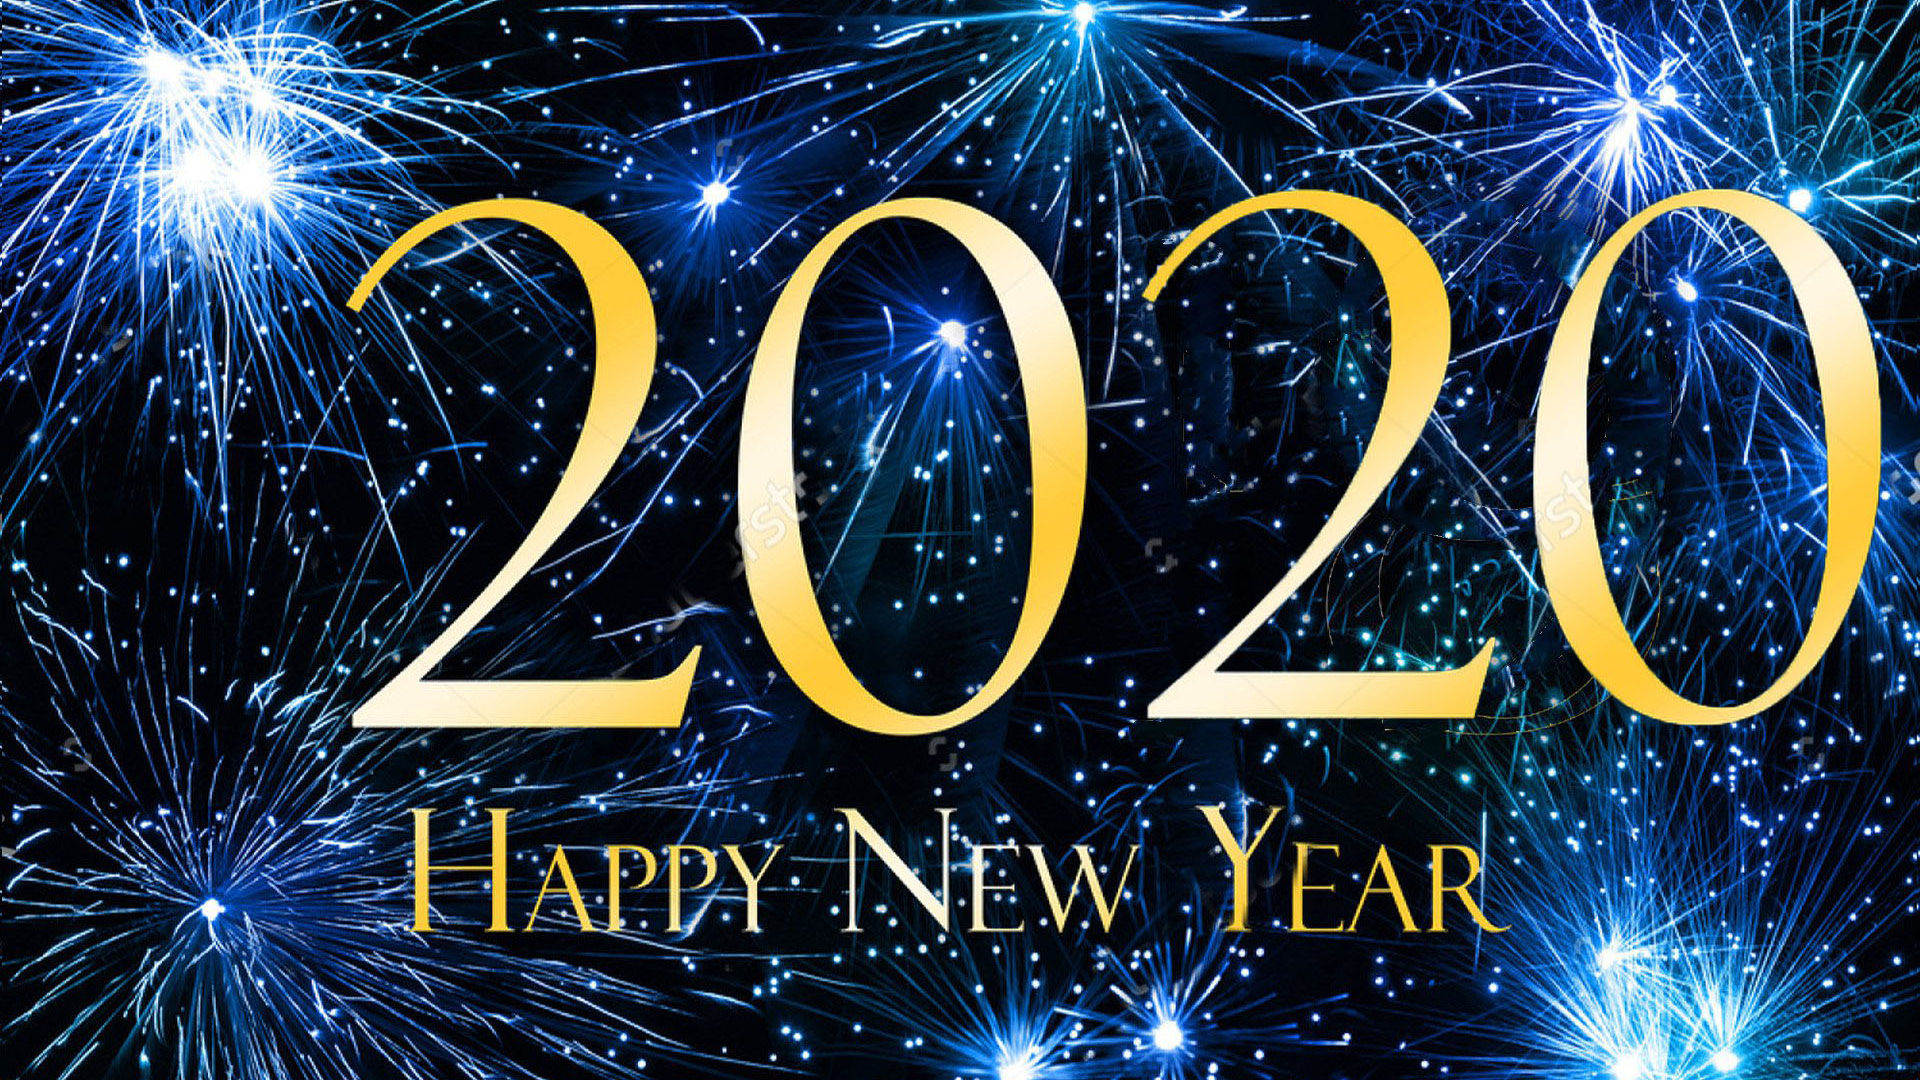 Happy New Year 2020 Blue Hd Wallpaper For Laptop And Tablet Free